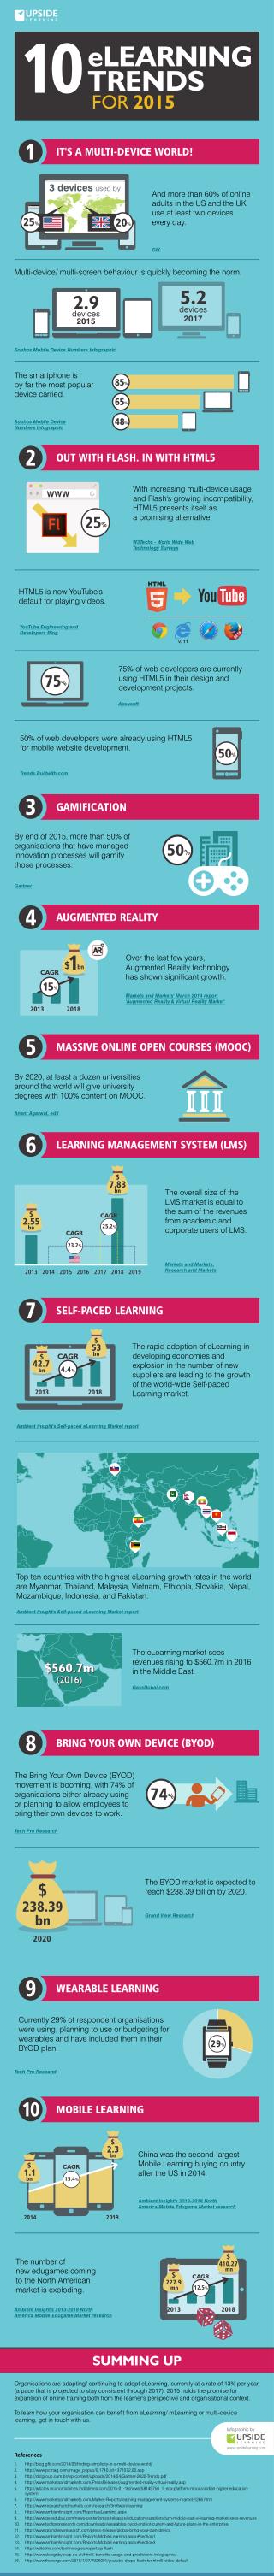 10 eLearning Trends for 2015